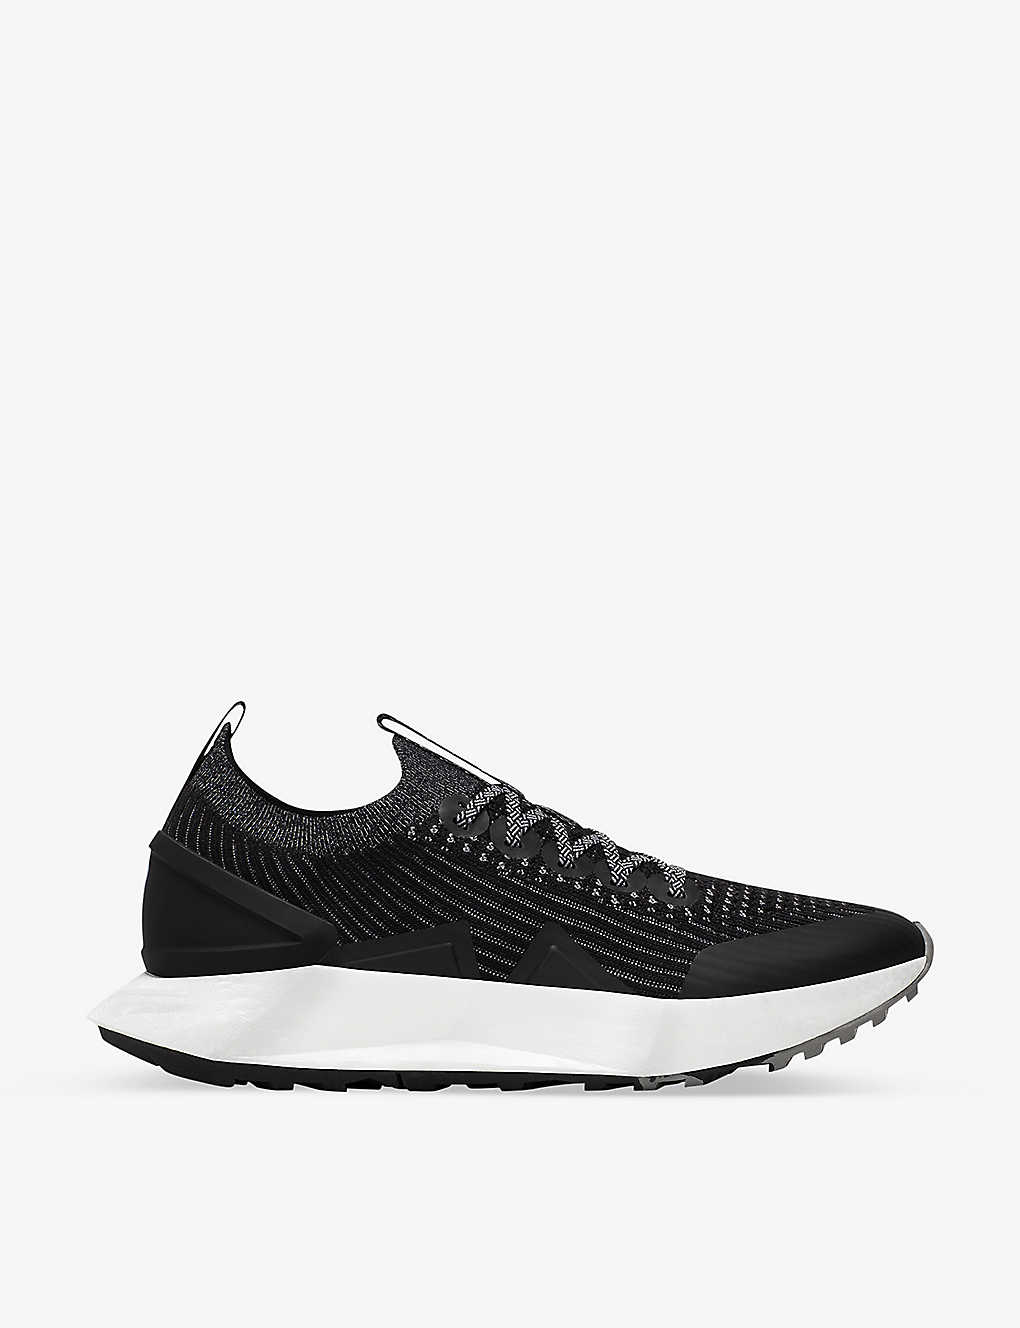 Allbirds Mens Black Blizzard Men's Tree Flyer 2 Mesh And Tpu Low-top Trainers